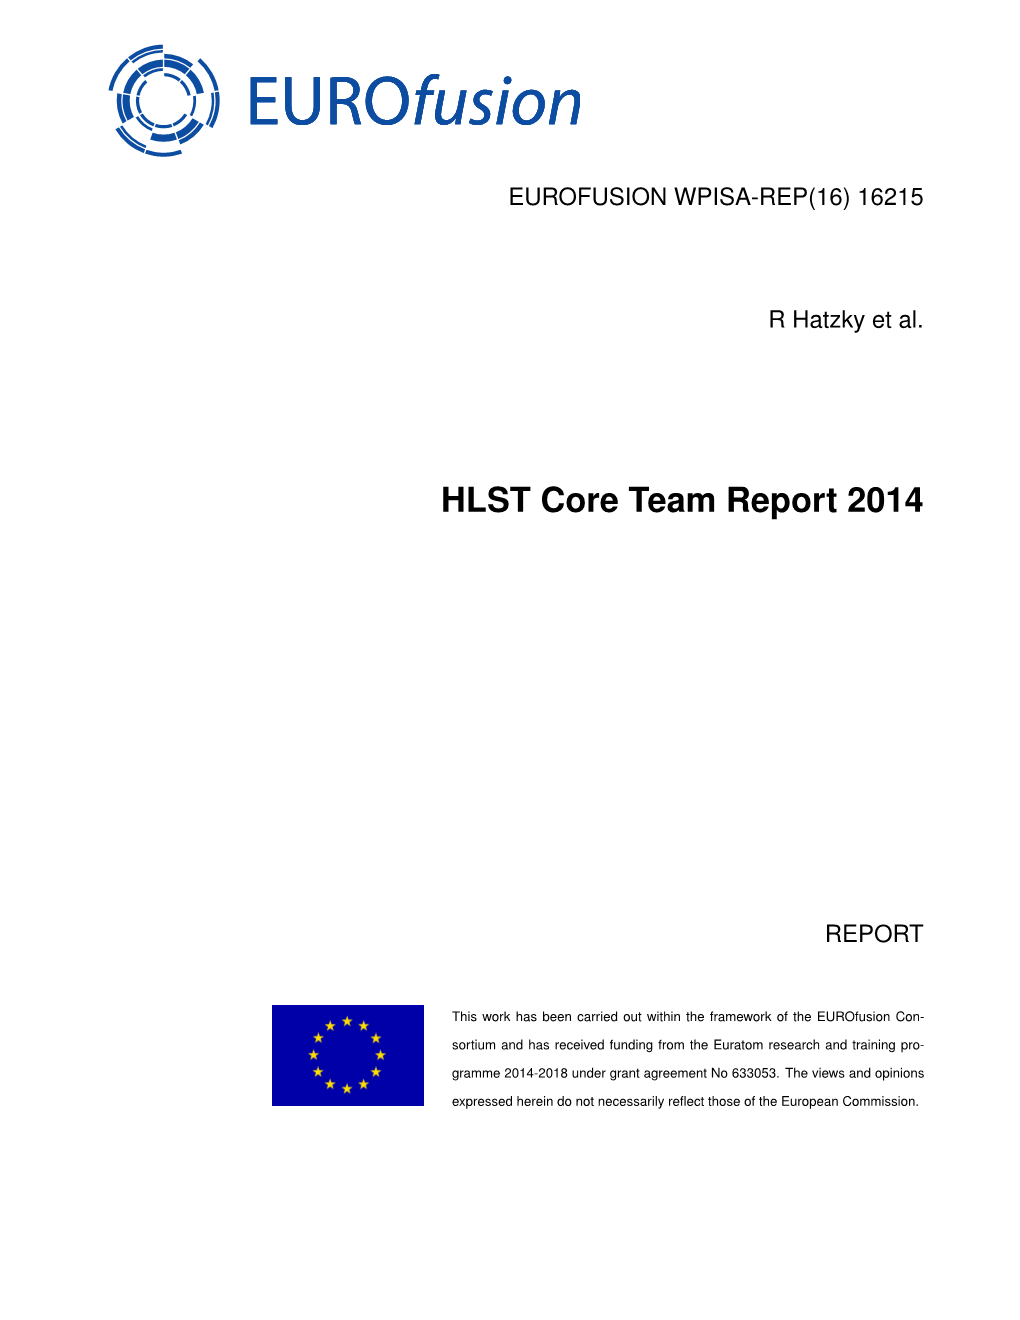 HLST Core Team Report 2014